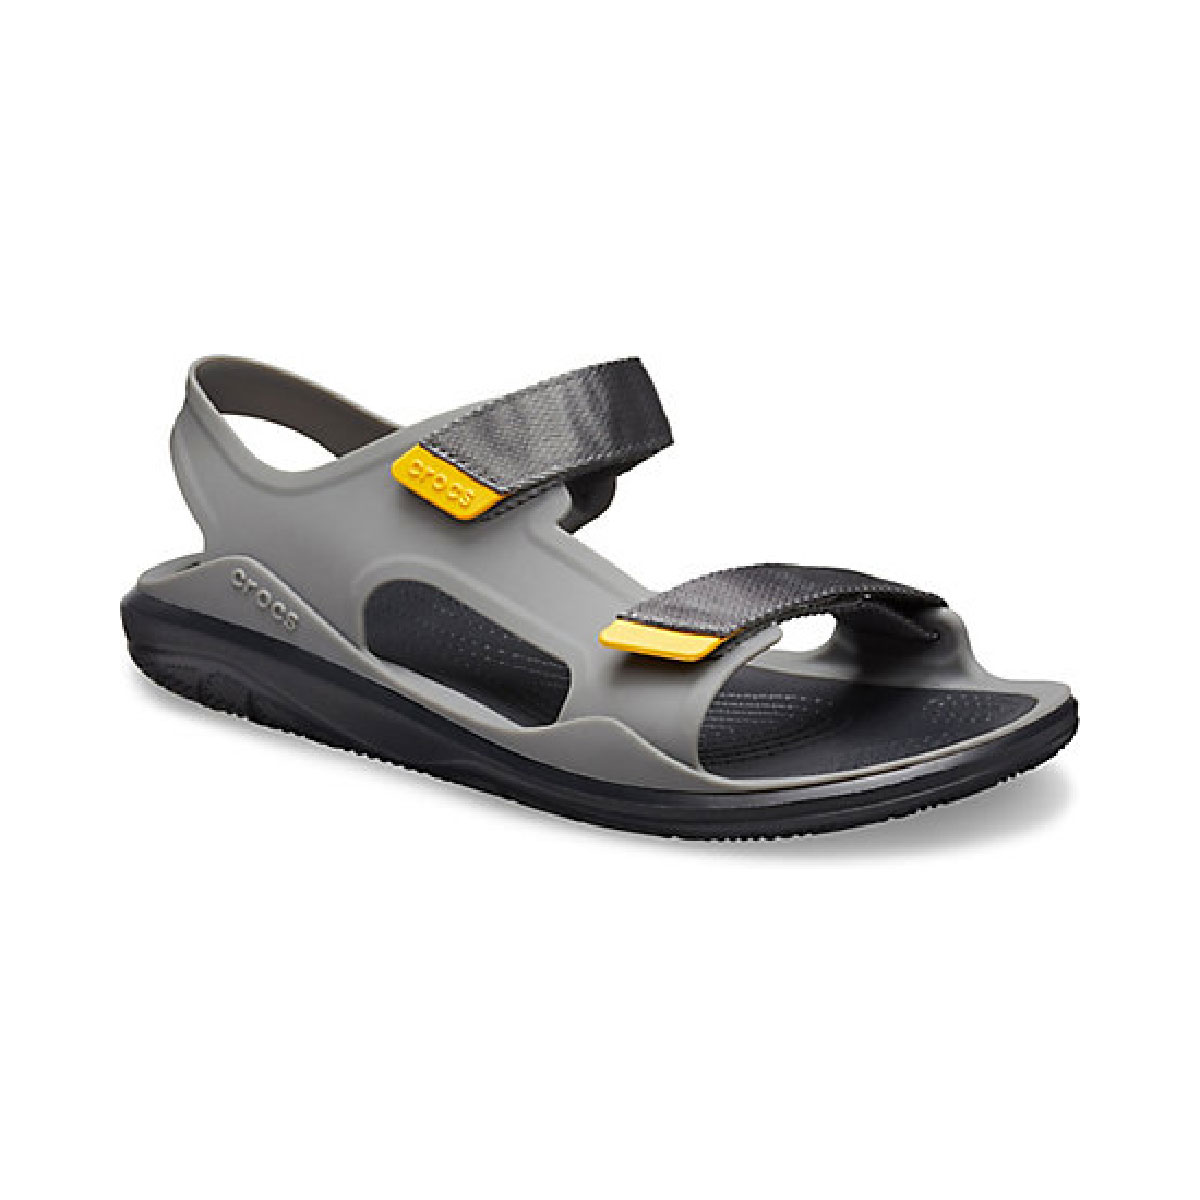 Swiftwater Molded Expedition Sandal Slate Grey/Black